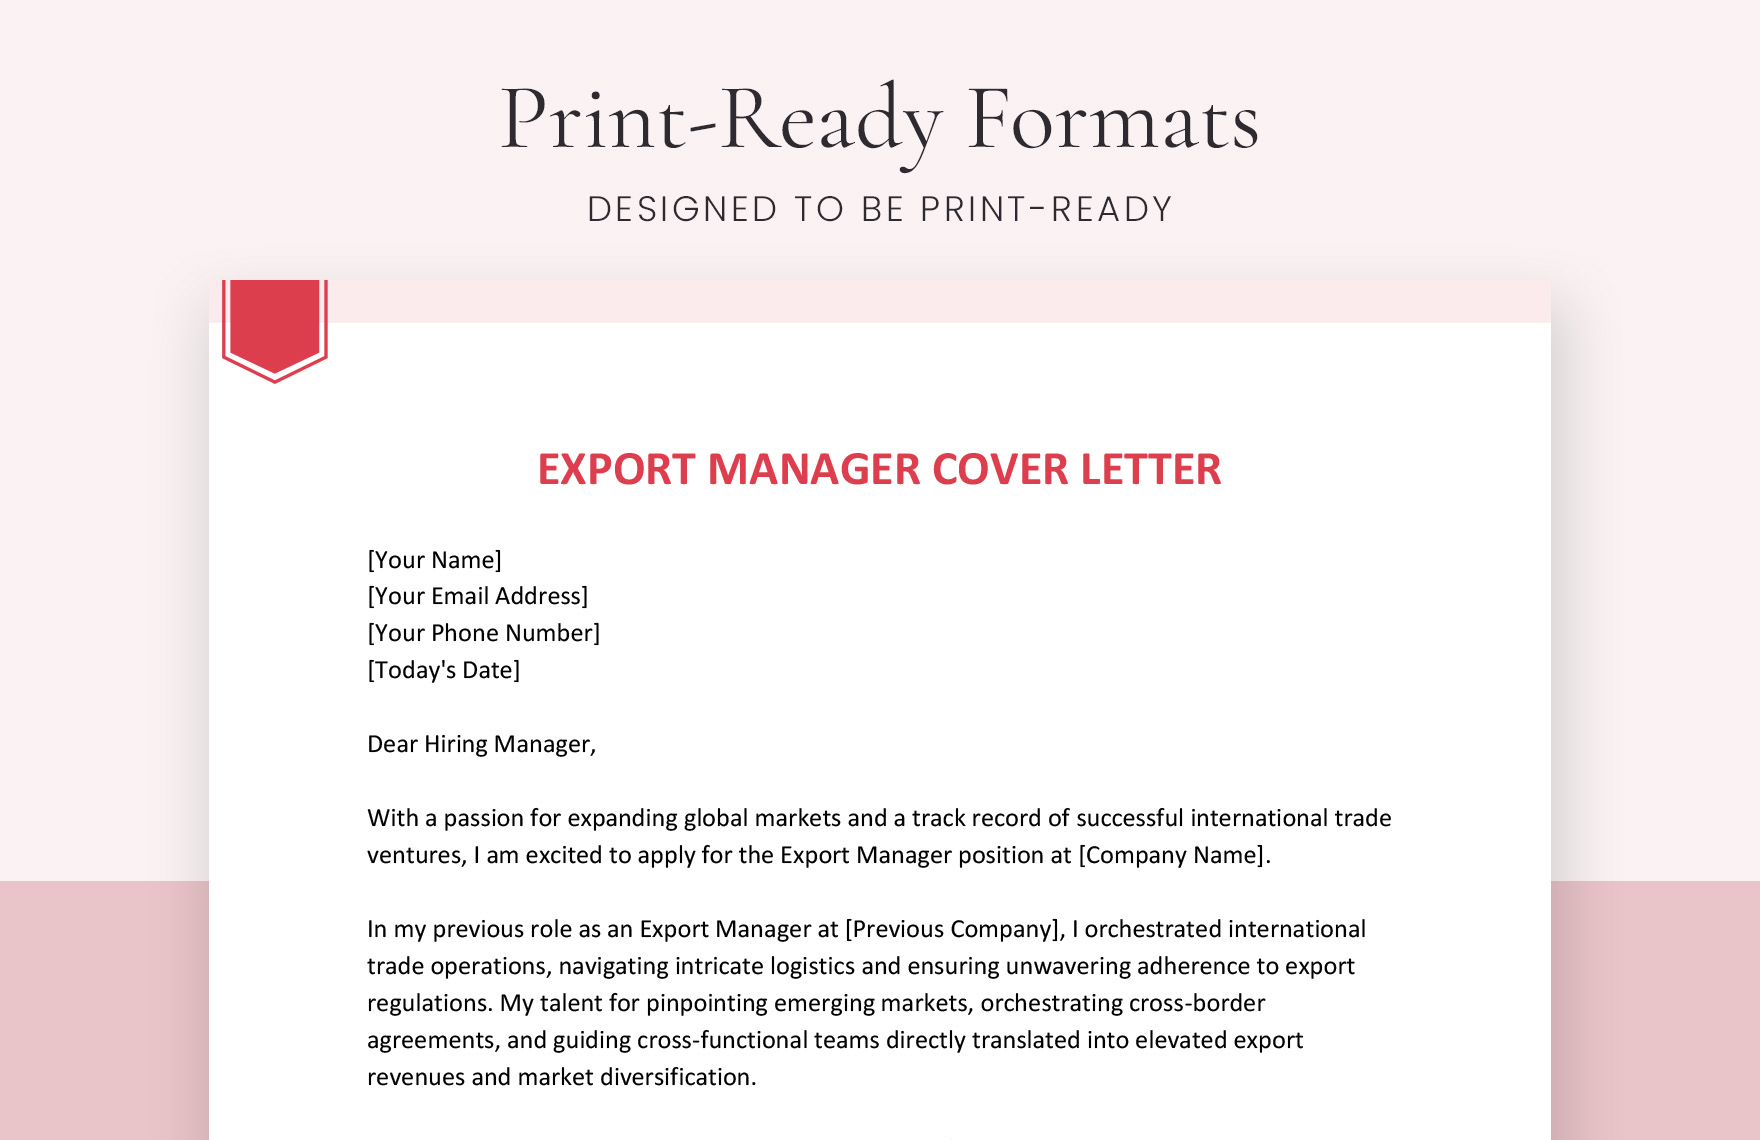 Export Manager Cover Letter